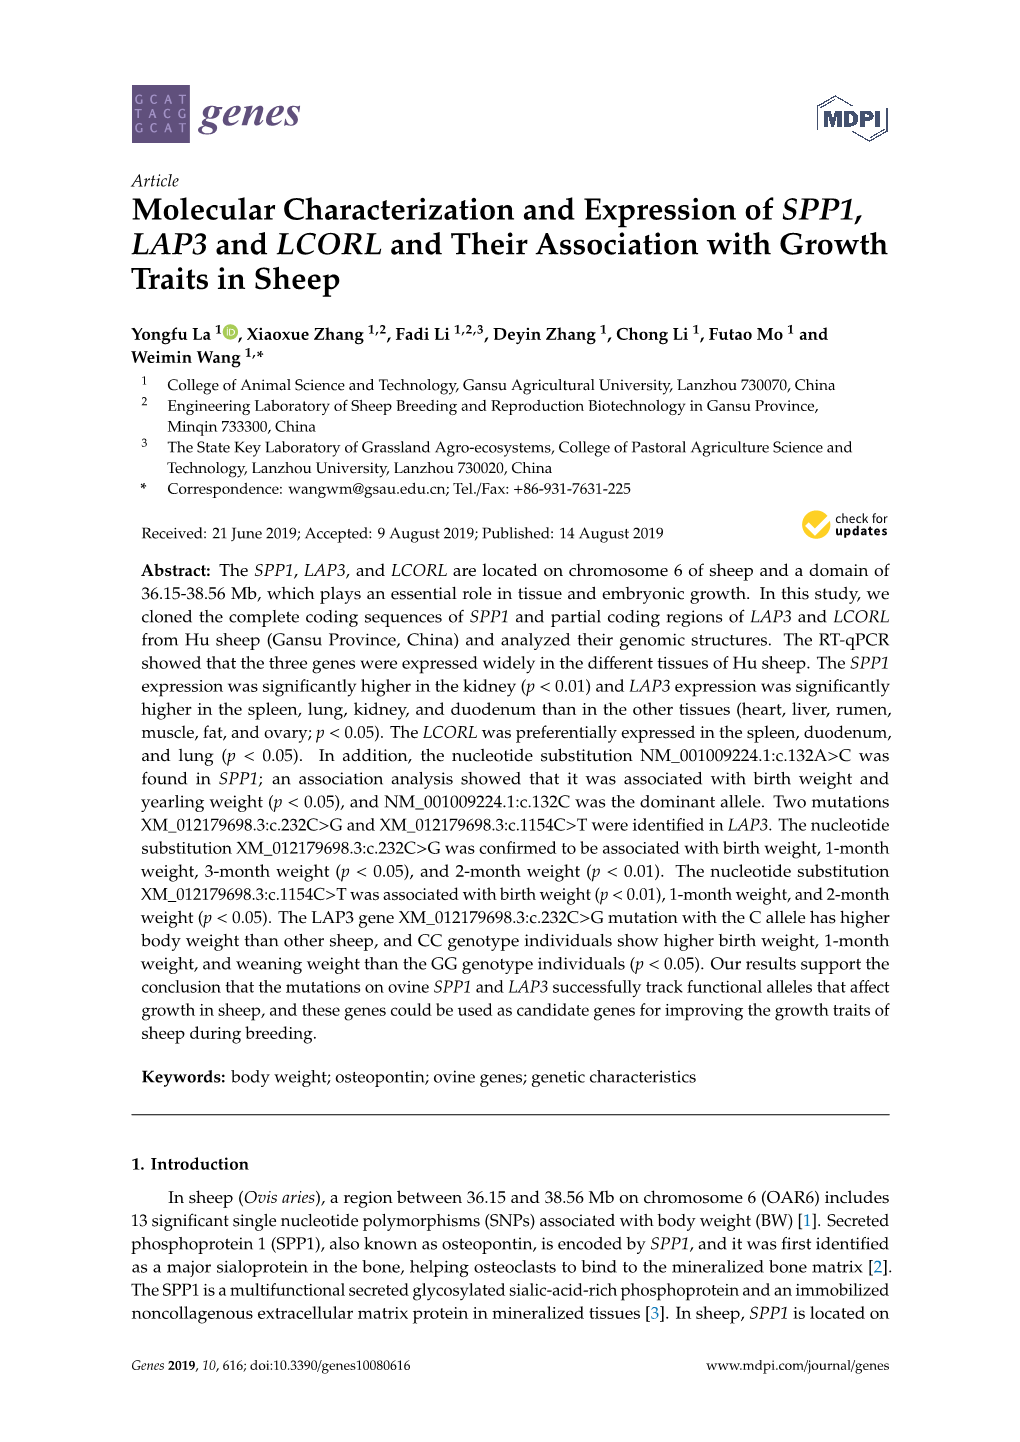 Molecular Characterization and Expression of SPP1, LAP3 and LCORL and Their Association with Growth Traits in Sheep